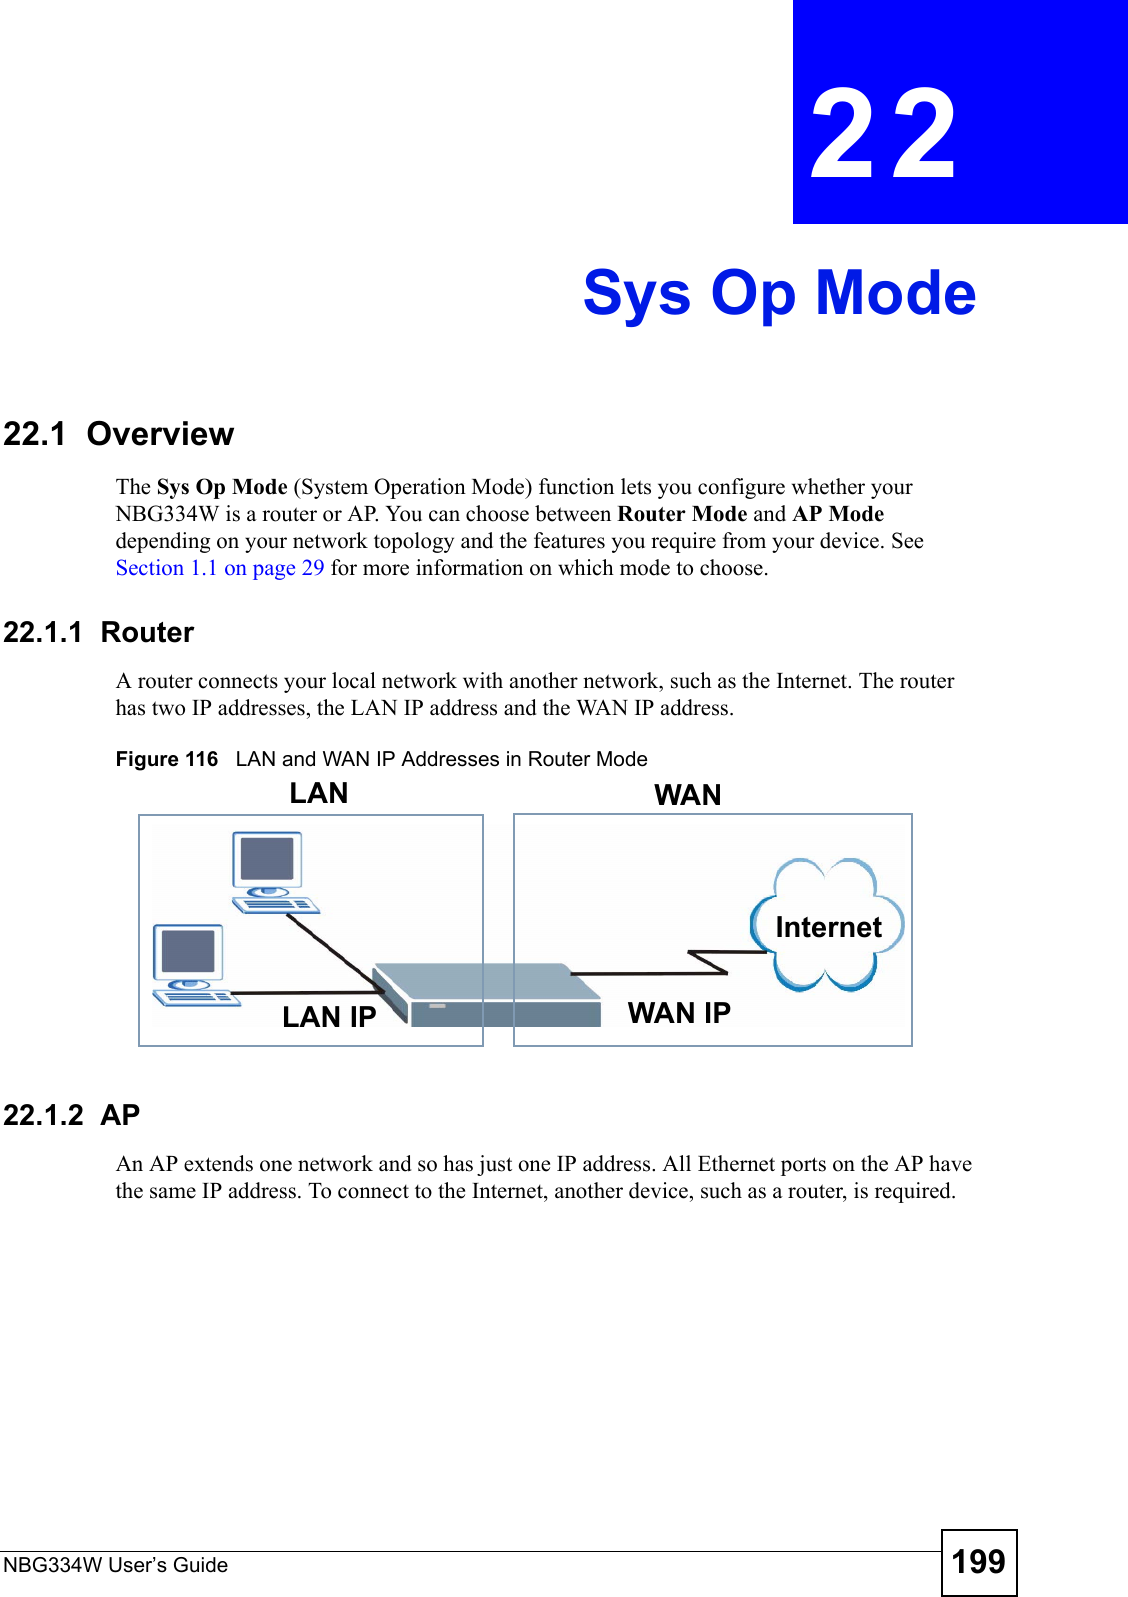 NBG334W User’s Guide 199CHAPTER  22 Sys Op Mode22.1  OverviewThe Sys Op Mode (System Operation Mode) function lets you configure whether your NBG334W is a router or AP. You can choose between Router Mode and AP Mode depending on your network topology and the features you require from your device. See Section 1.1 on page 29 for more information on which mode to choose.22.1.1  Router A router connects your local network with another network, such as the Internet. The router has two IP addresses, the LAN IP address and the WAN IP address.Figure 116   LAN and WAN IP Addresses in Router Mode22.1.2  AP An AP extends one network and so has just one IP address. All Ethernet ports on the AP have the same IP address. To connect to the Internet, another device, such as a router, is required. LAN IP WAN IPInternetLAN WAN